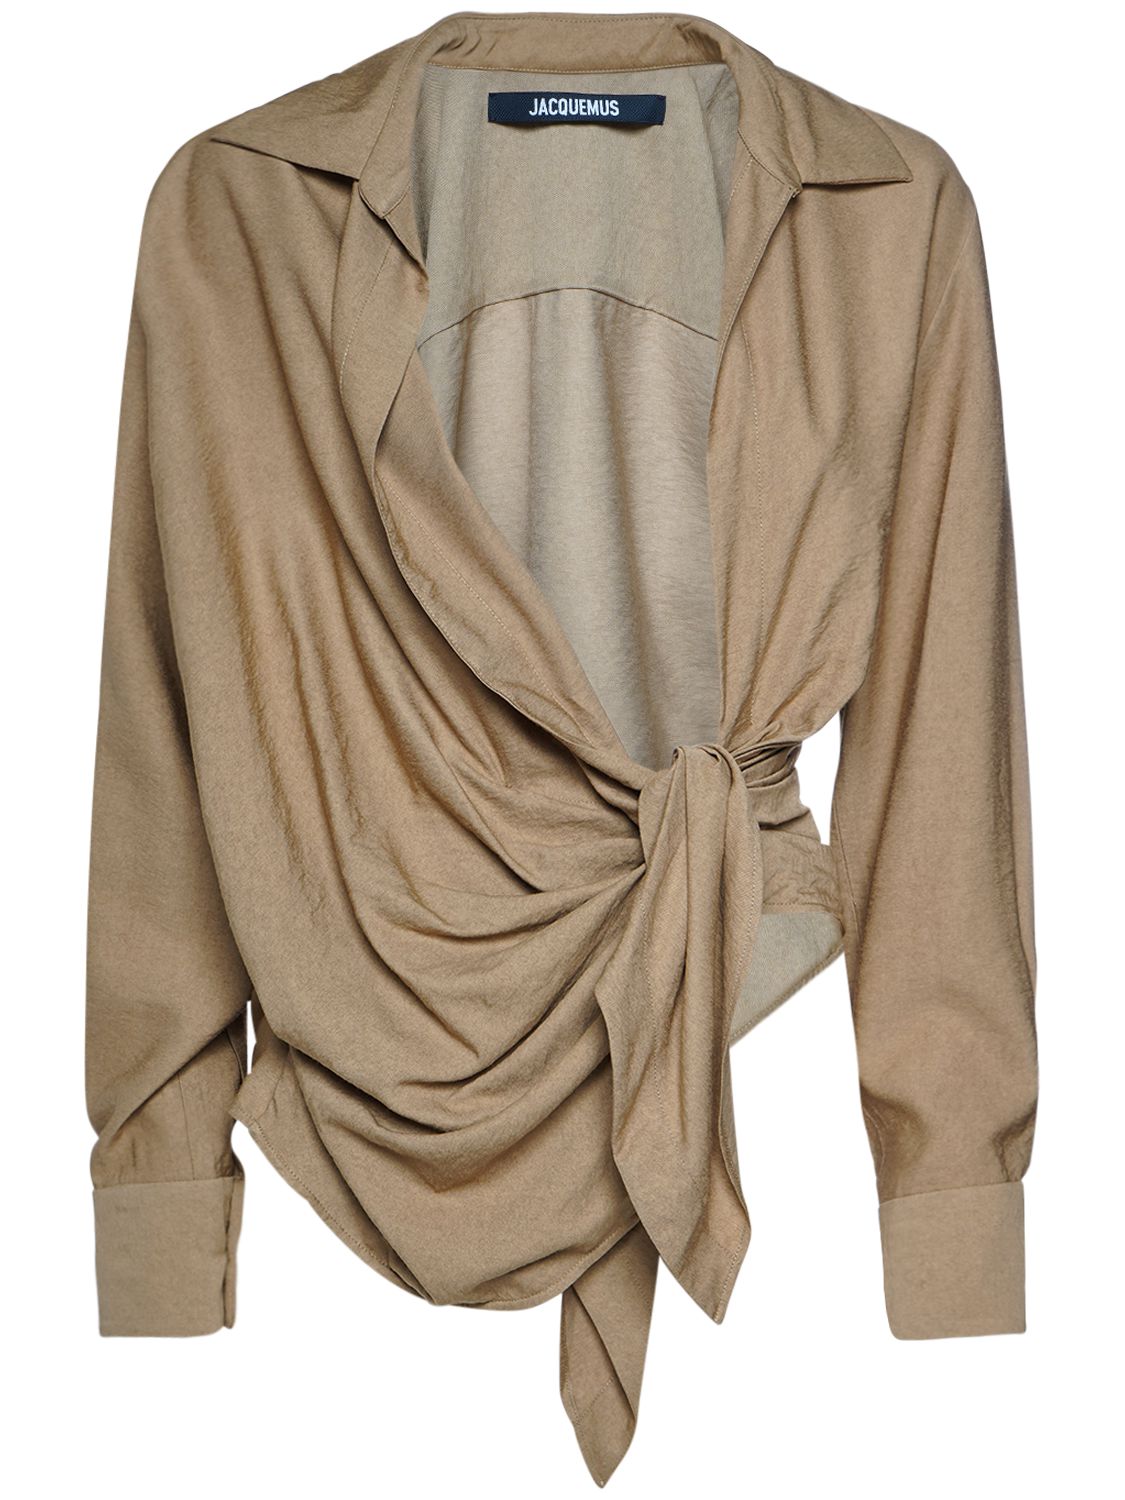 Jacquemus La Chemise Bahia Knotted Jersey Shirt In Beige